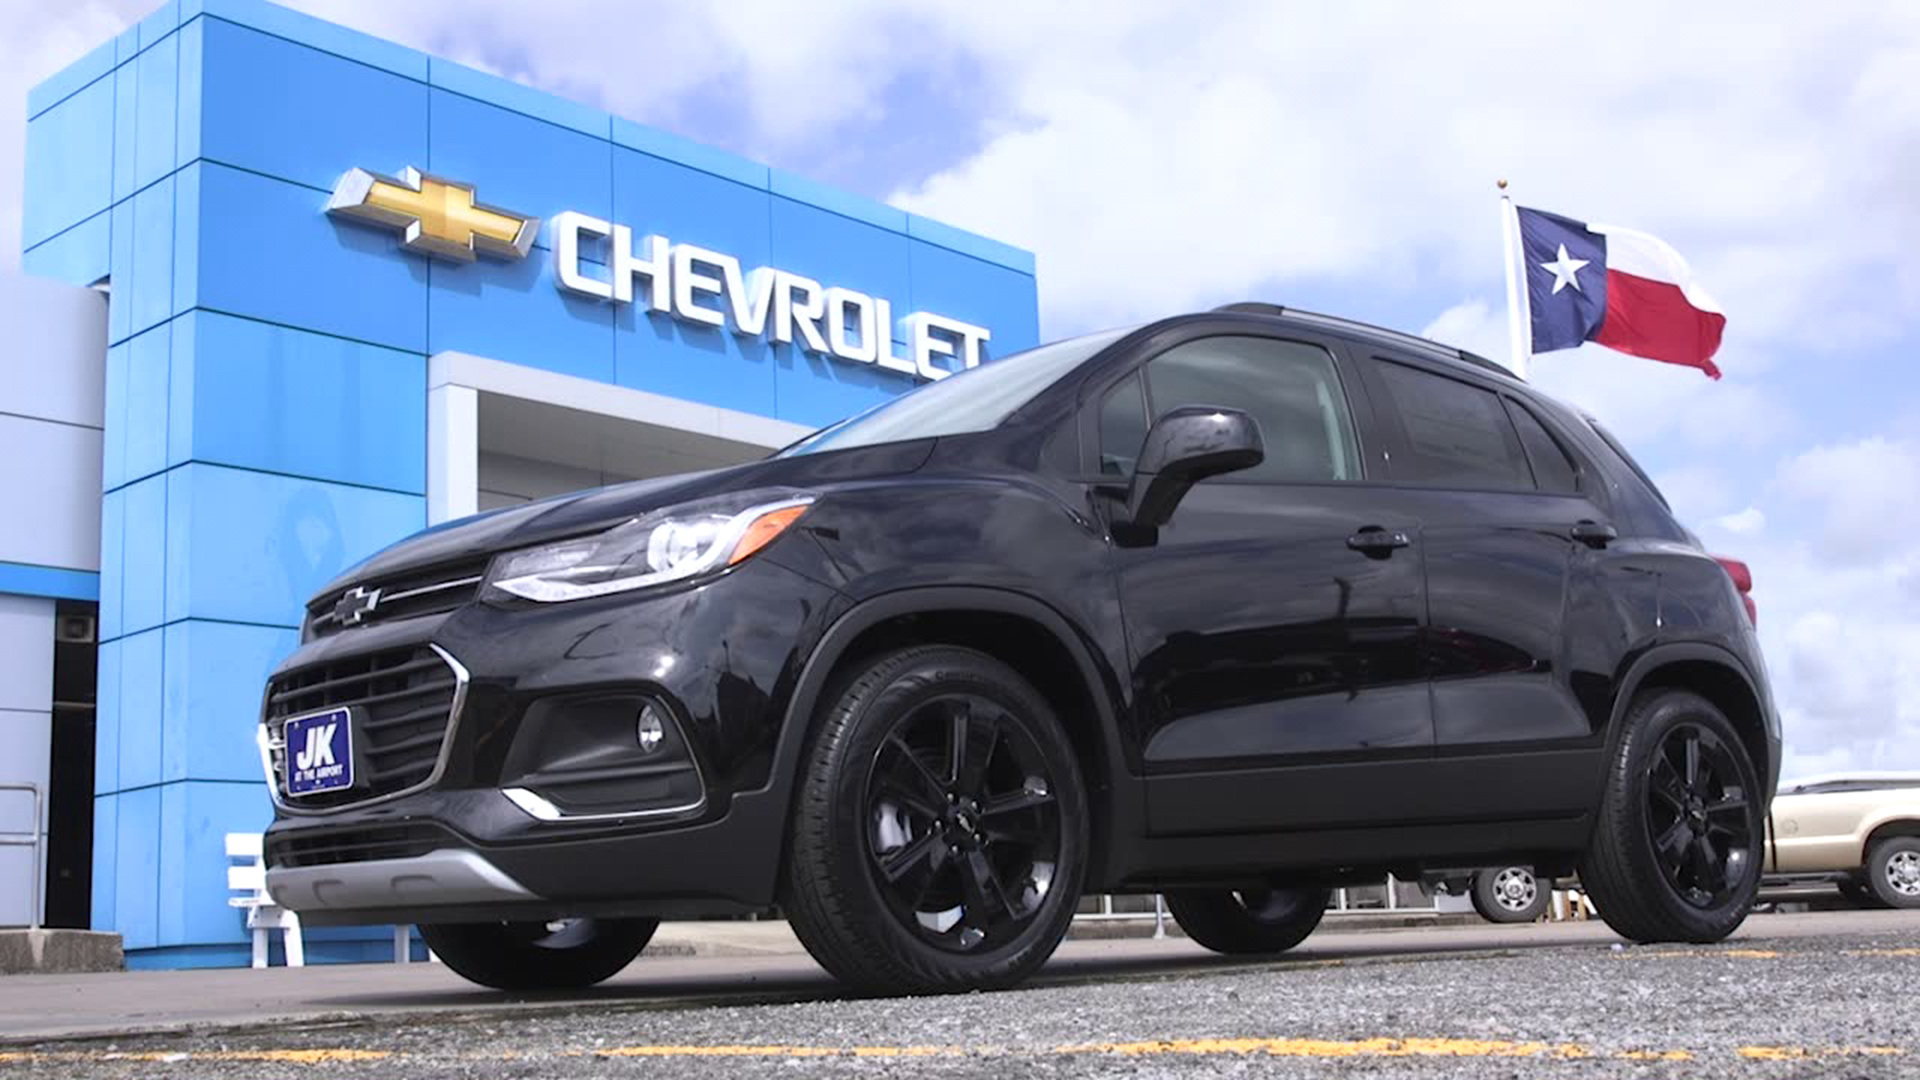 Check out this 2019 Chevrolet Trax Premier Midnight Edition from JK Chevrolet in Nederland. Call (409) 726-8905 or visit http://JKChevrolet.com to get yours!